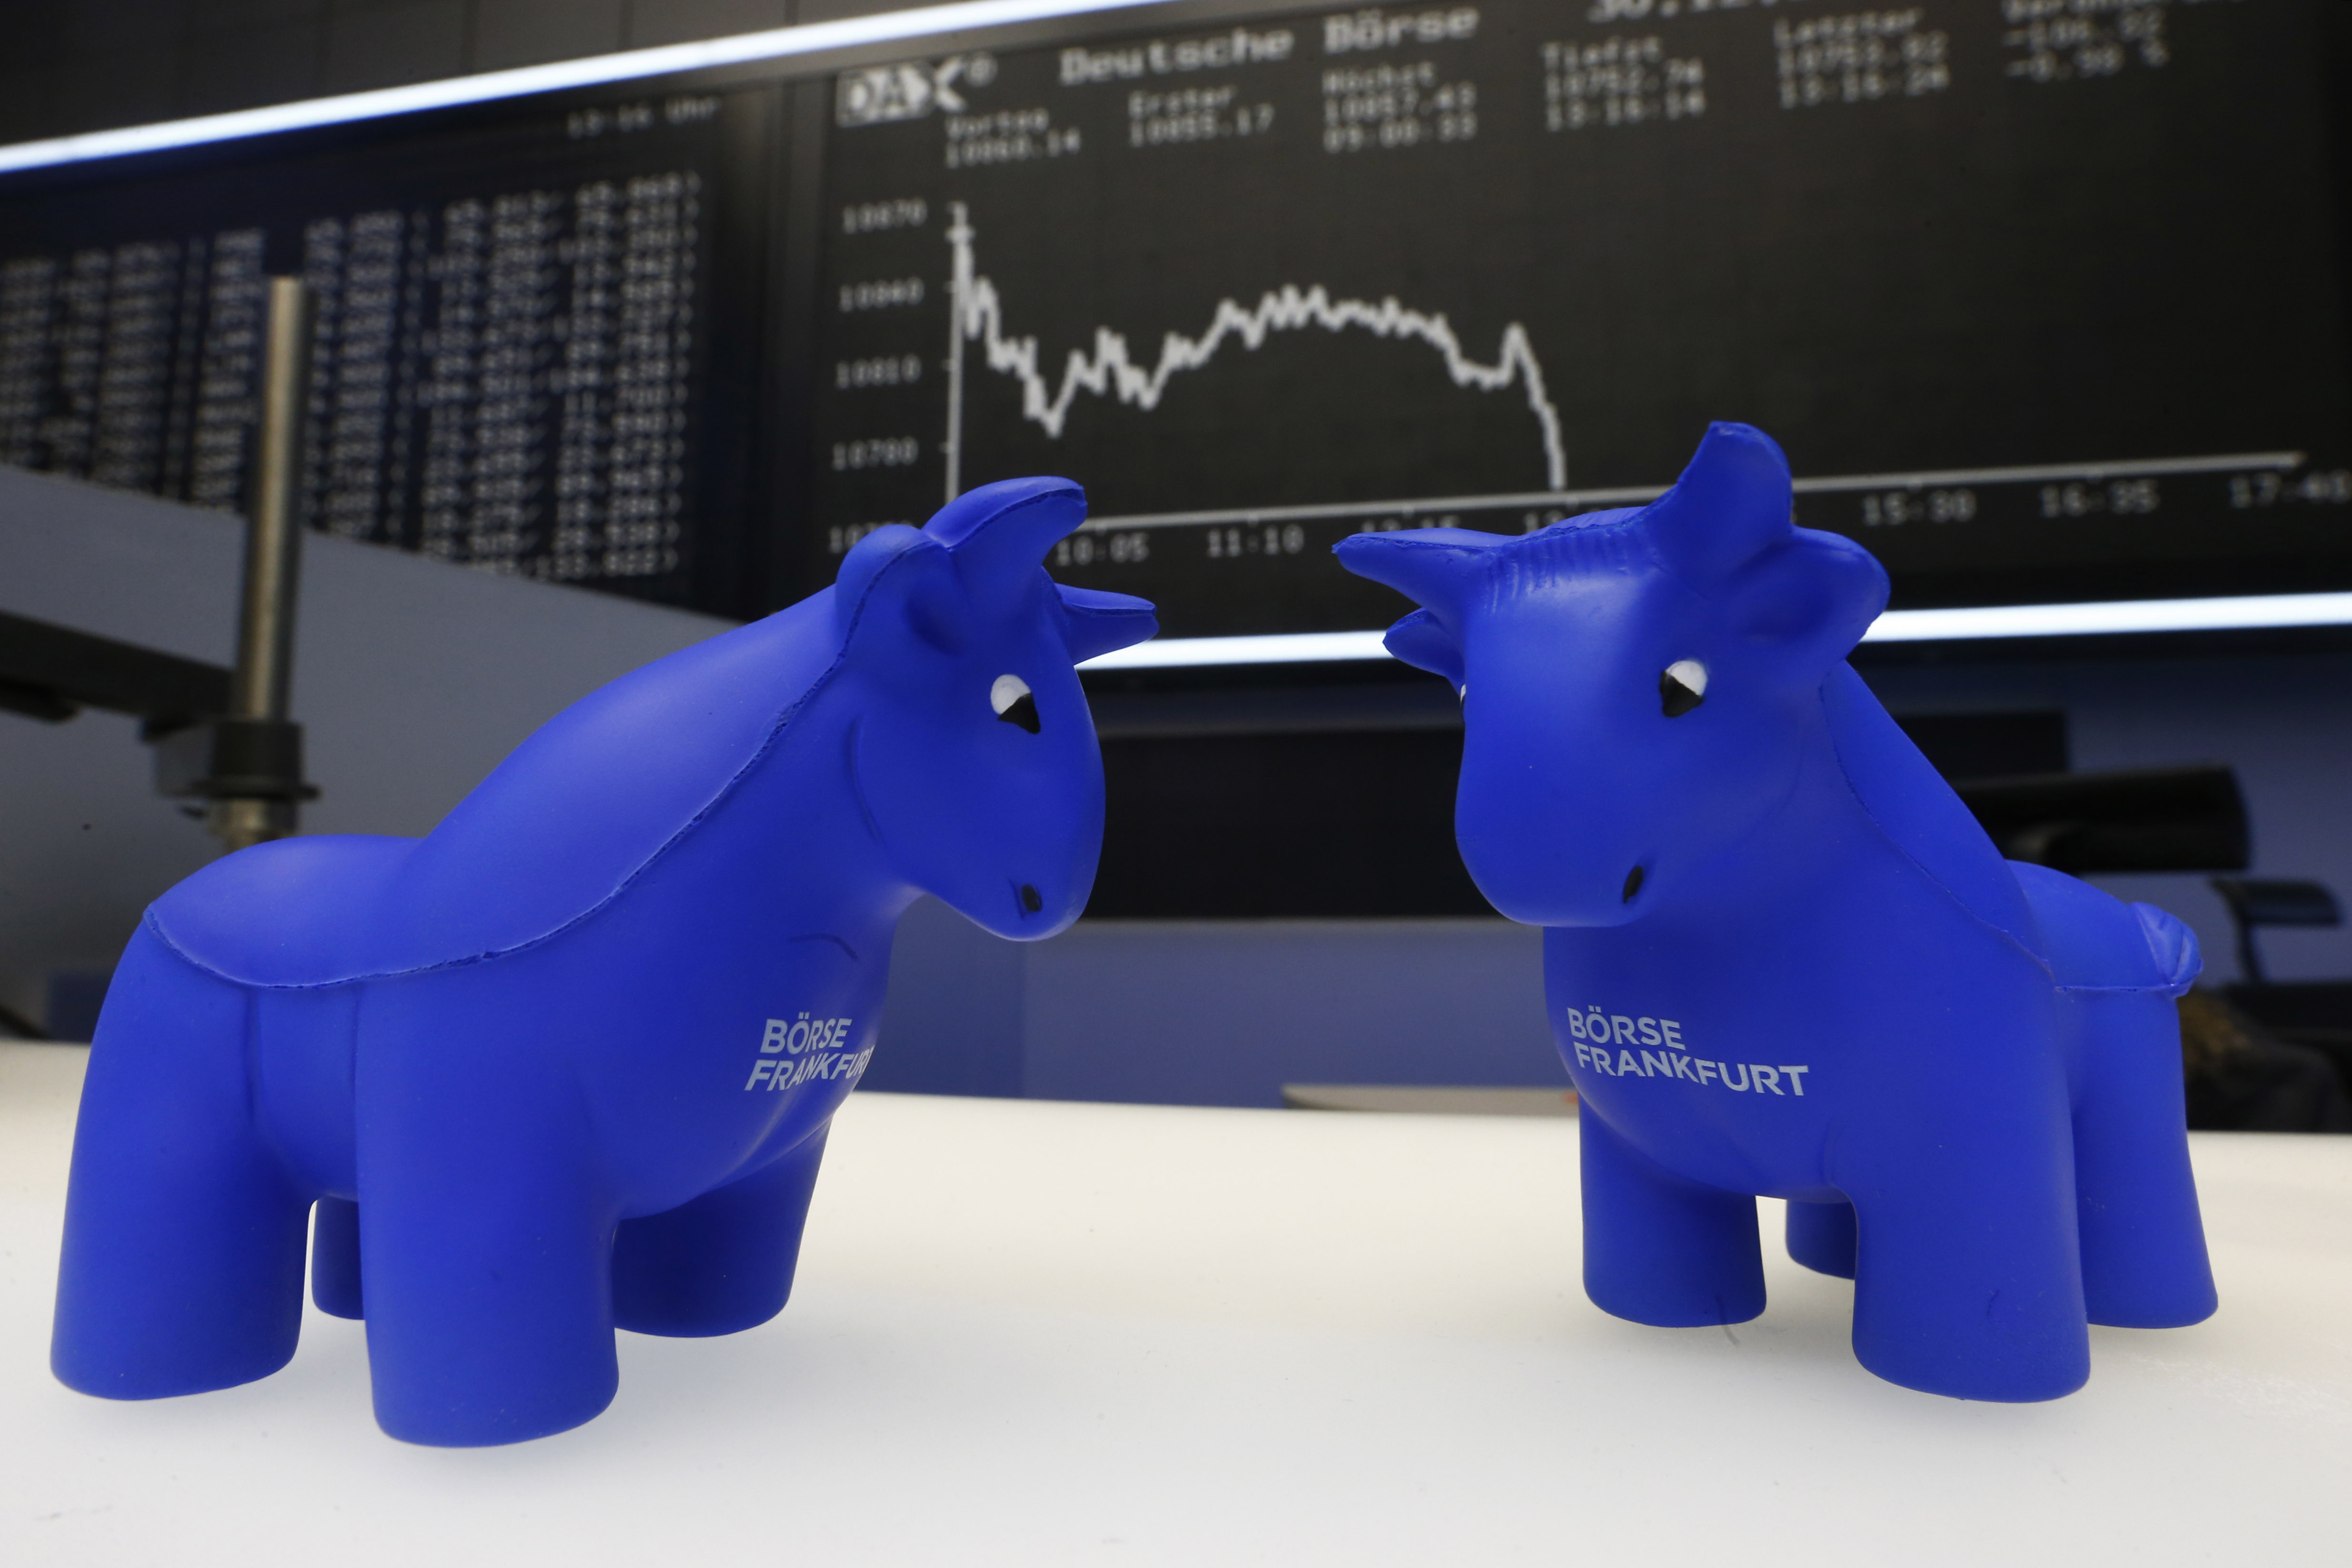 Foam bull figures are seen in front of the German DAX Index board during the last trading day at Frankfurt's stock exchange